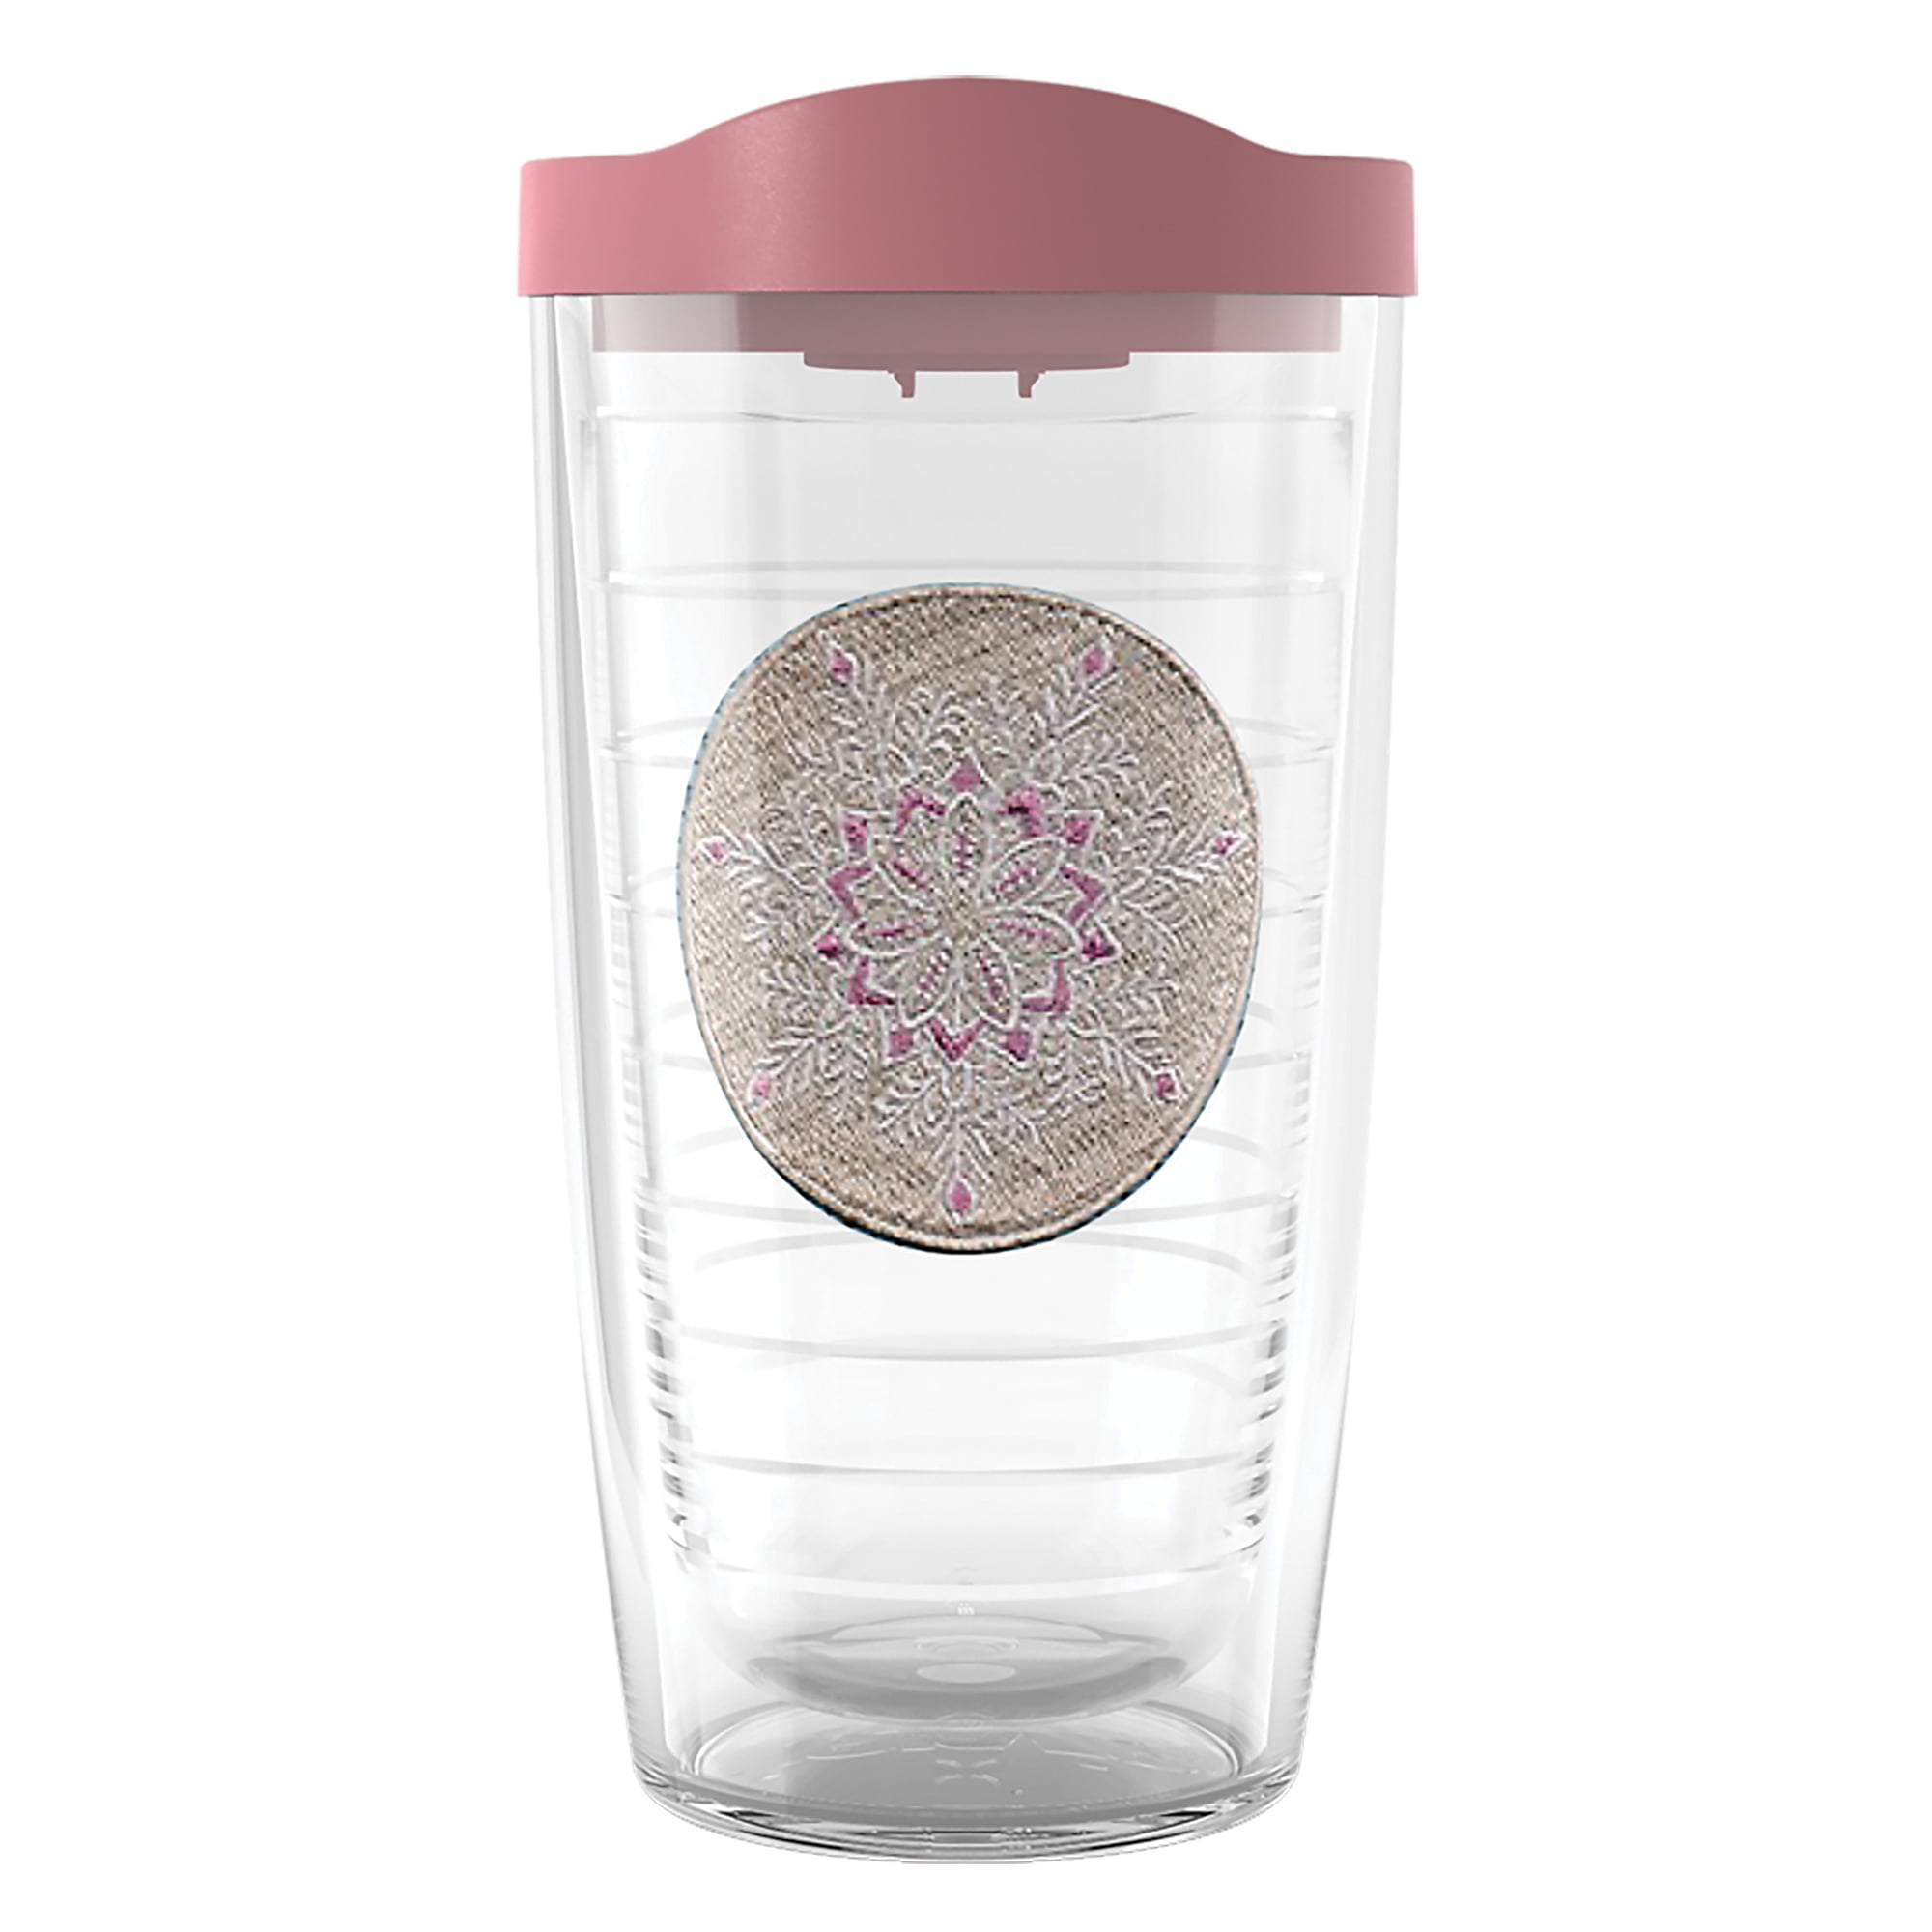 RESCUE RANCH 16 oz TERVIS TUMBLER INSULATED HOT/COLD CUP 